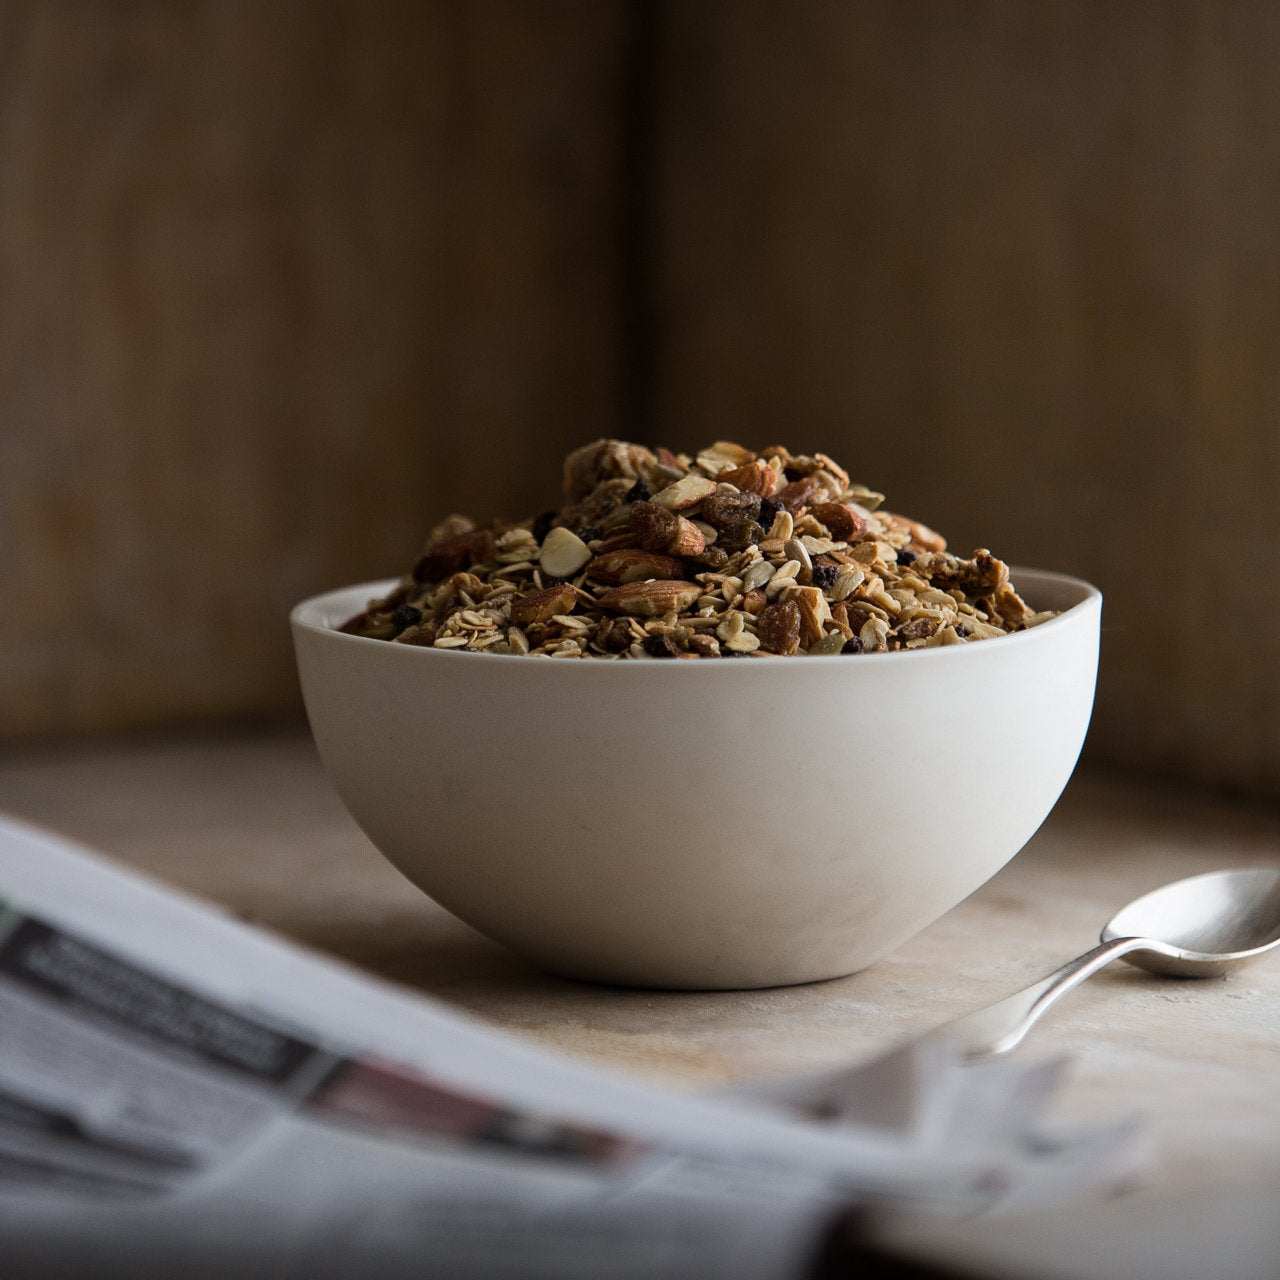 Our Woodfired Muesli